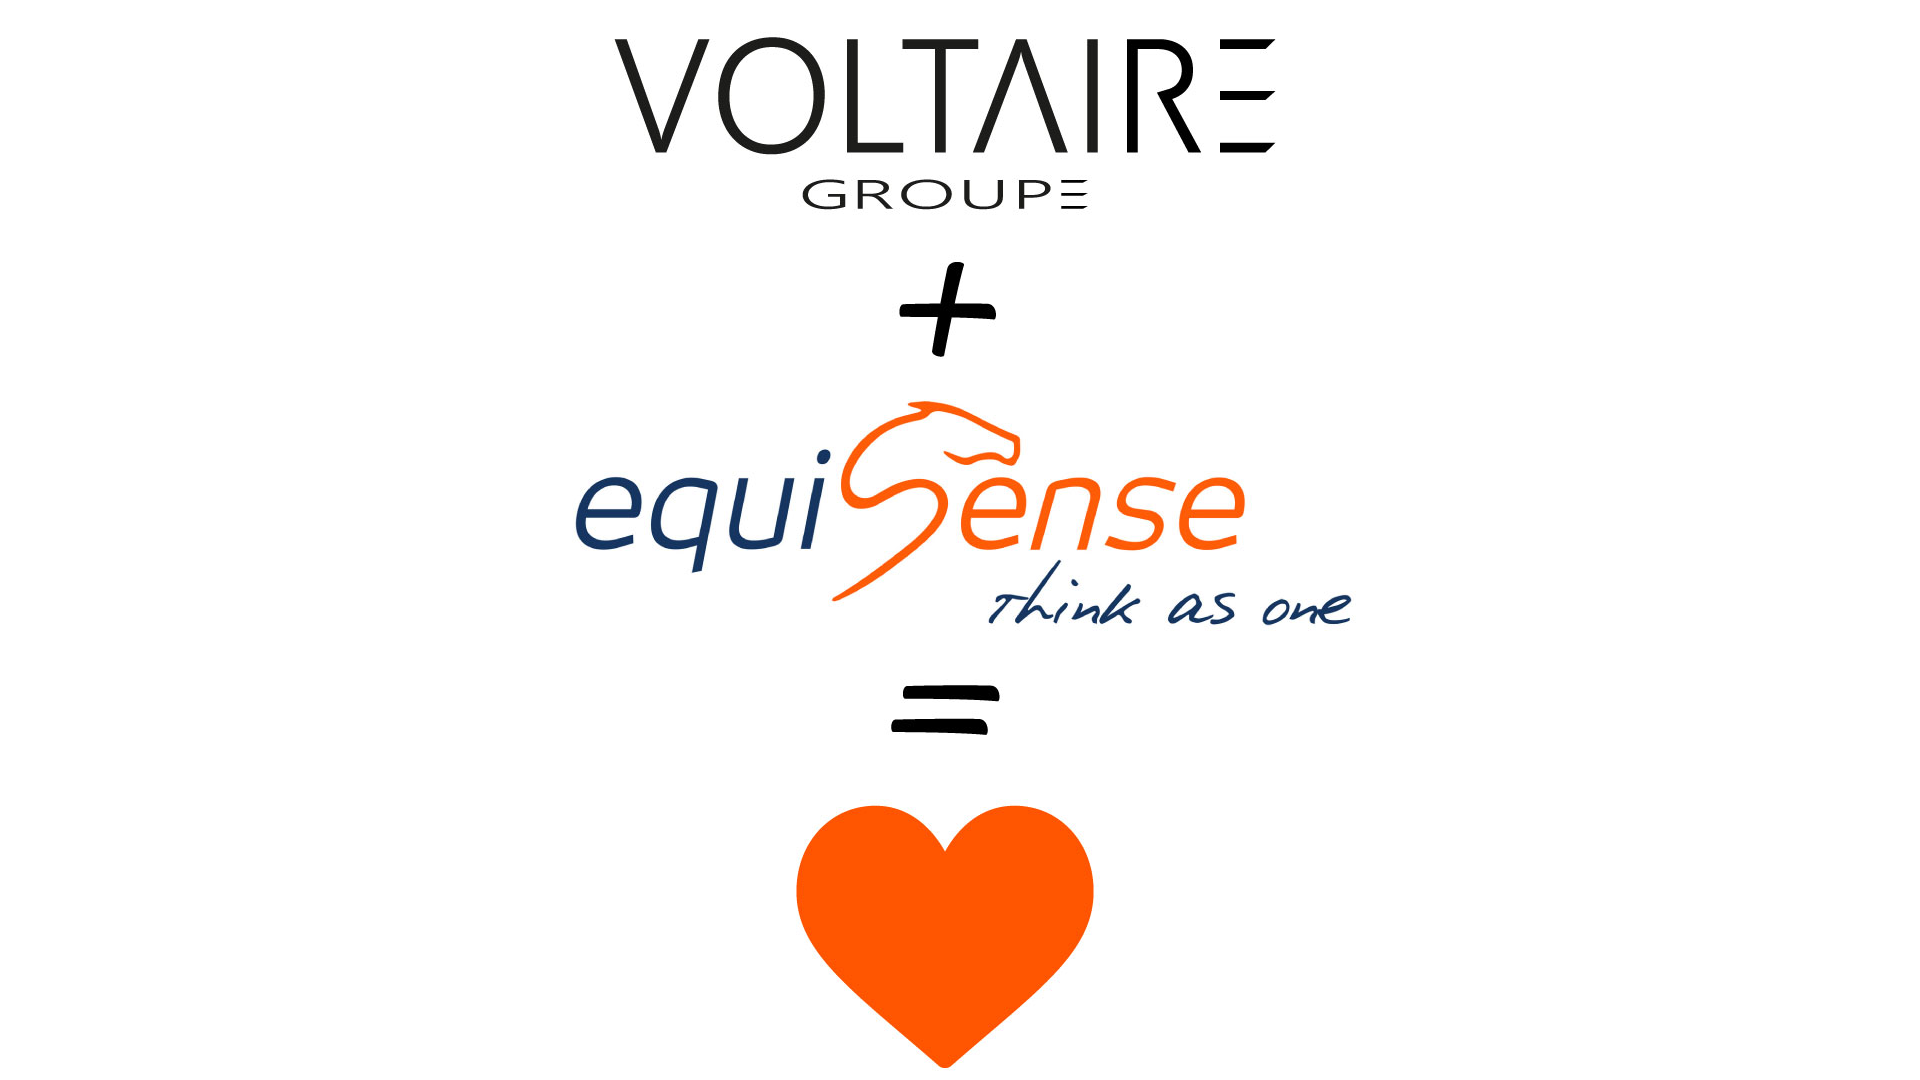 Equisense join the Voltaire family